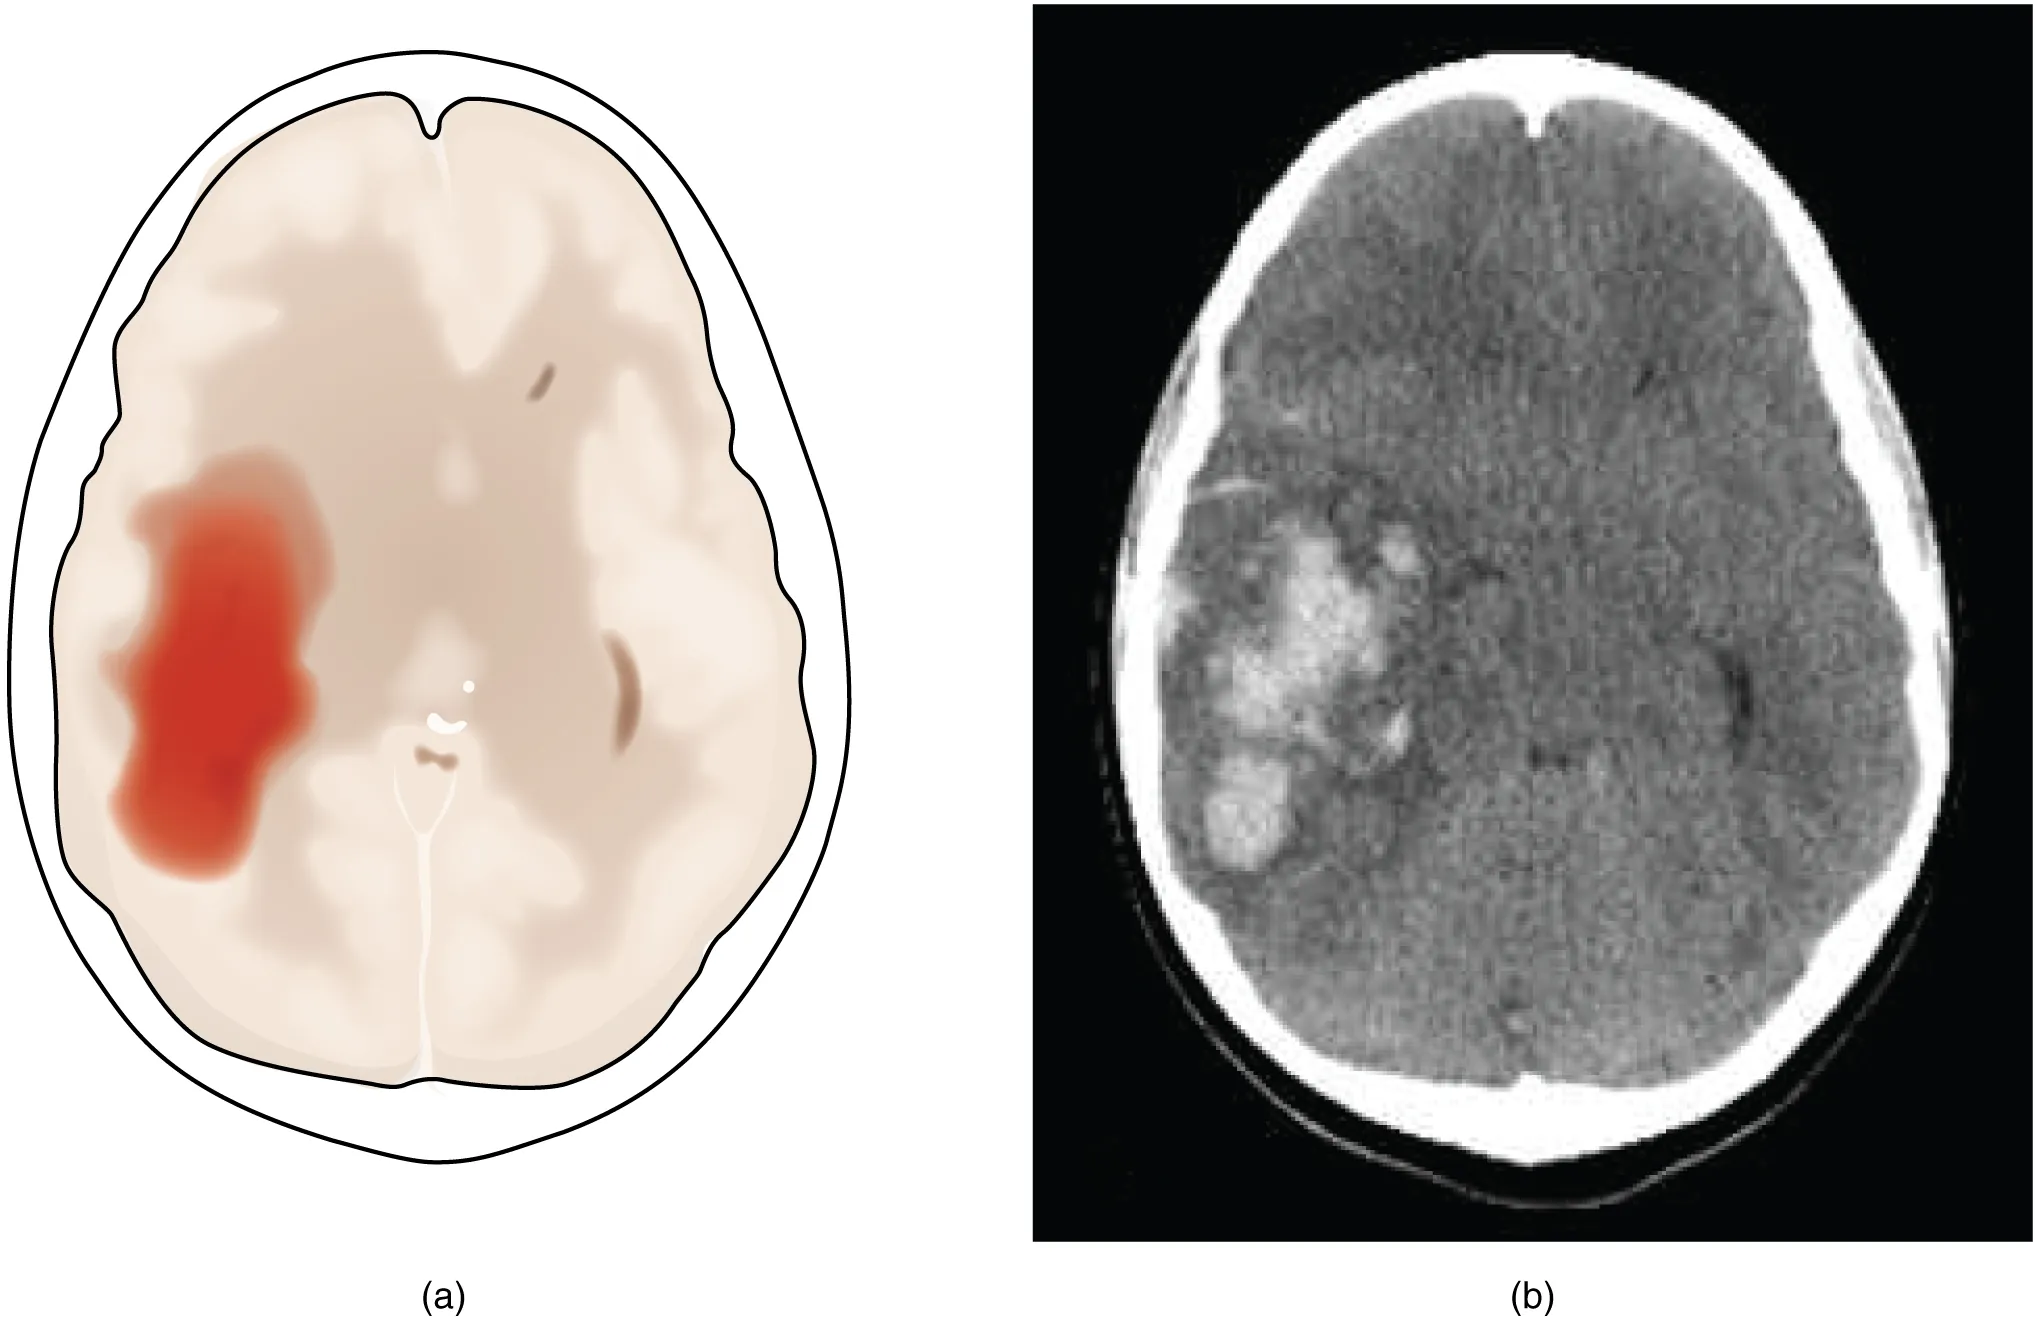 The left panel of this image shows an image of the brain with a region in red. Arrows pointing towards this region indicate a hemorrhage associated with a stroke. The right panel shows a hemorrhage as it might appear on a CT scan.